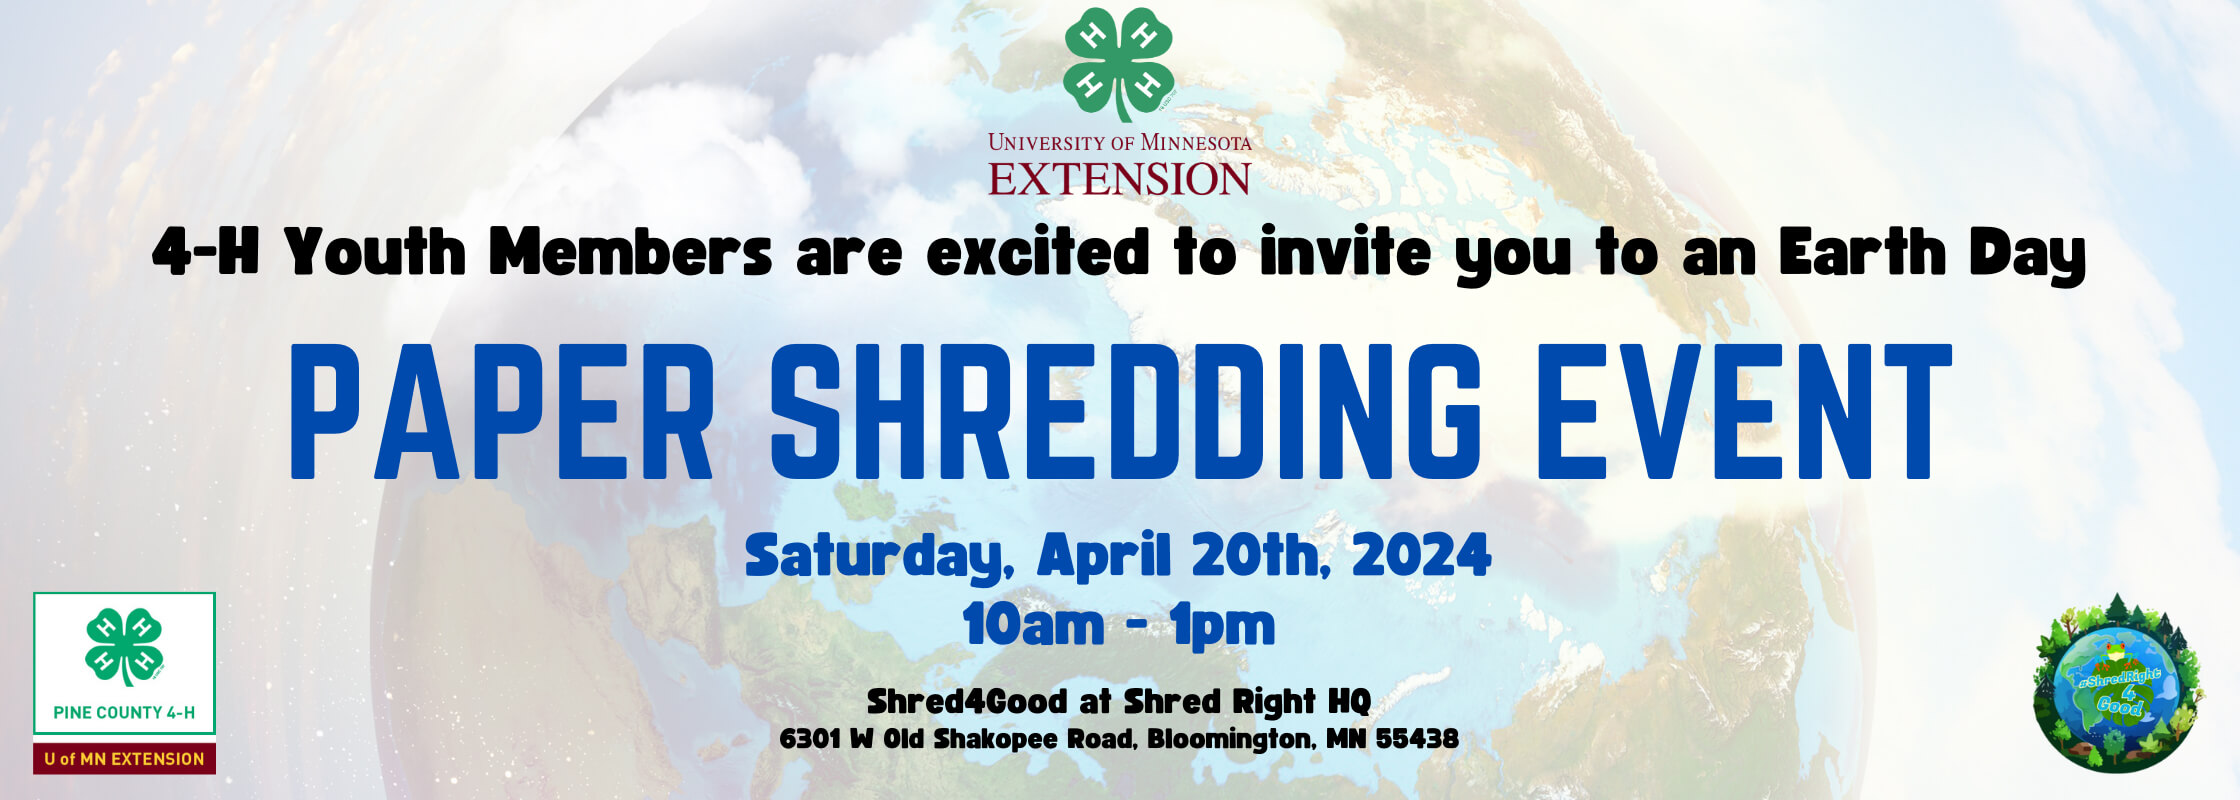 Banner for the Earth Day paper shredding event on April 20th, 2024, hosted by 4-H Youth Members and ShredRight in Bloomington, MN, promoting recycling and secure document disposal.